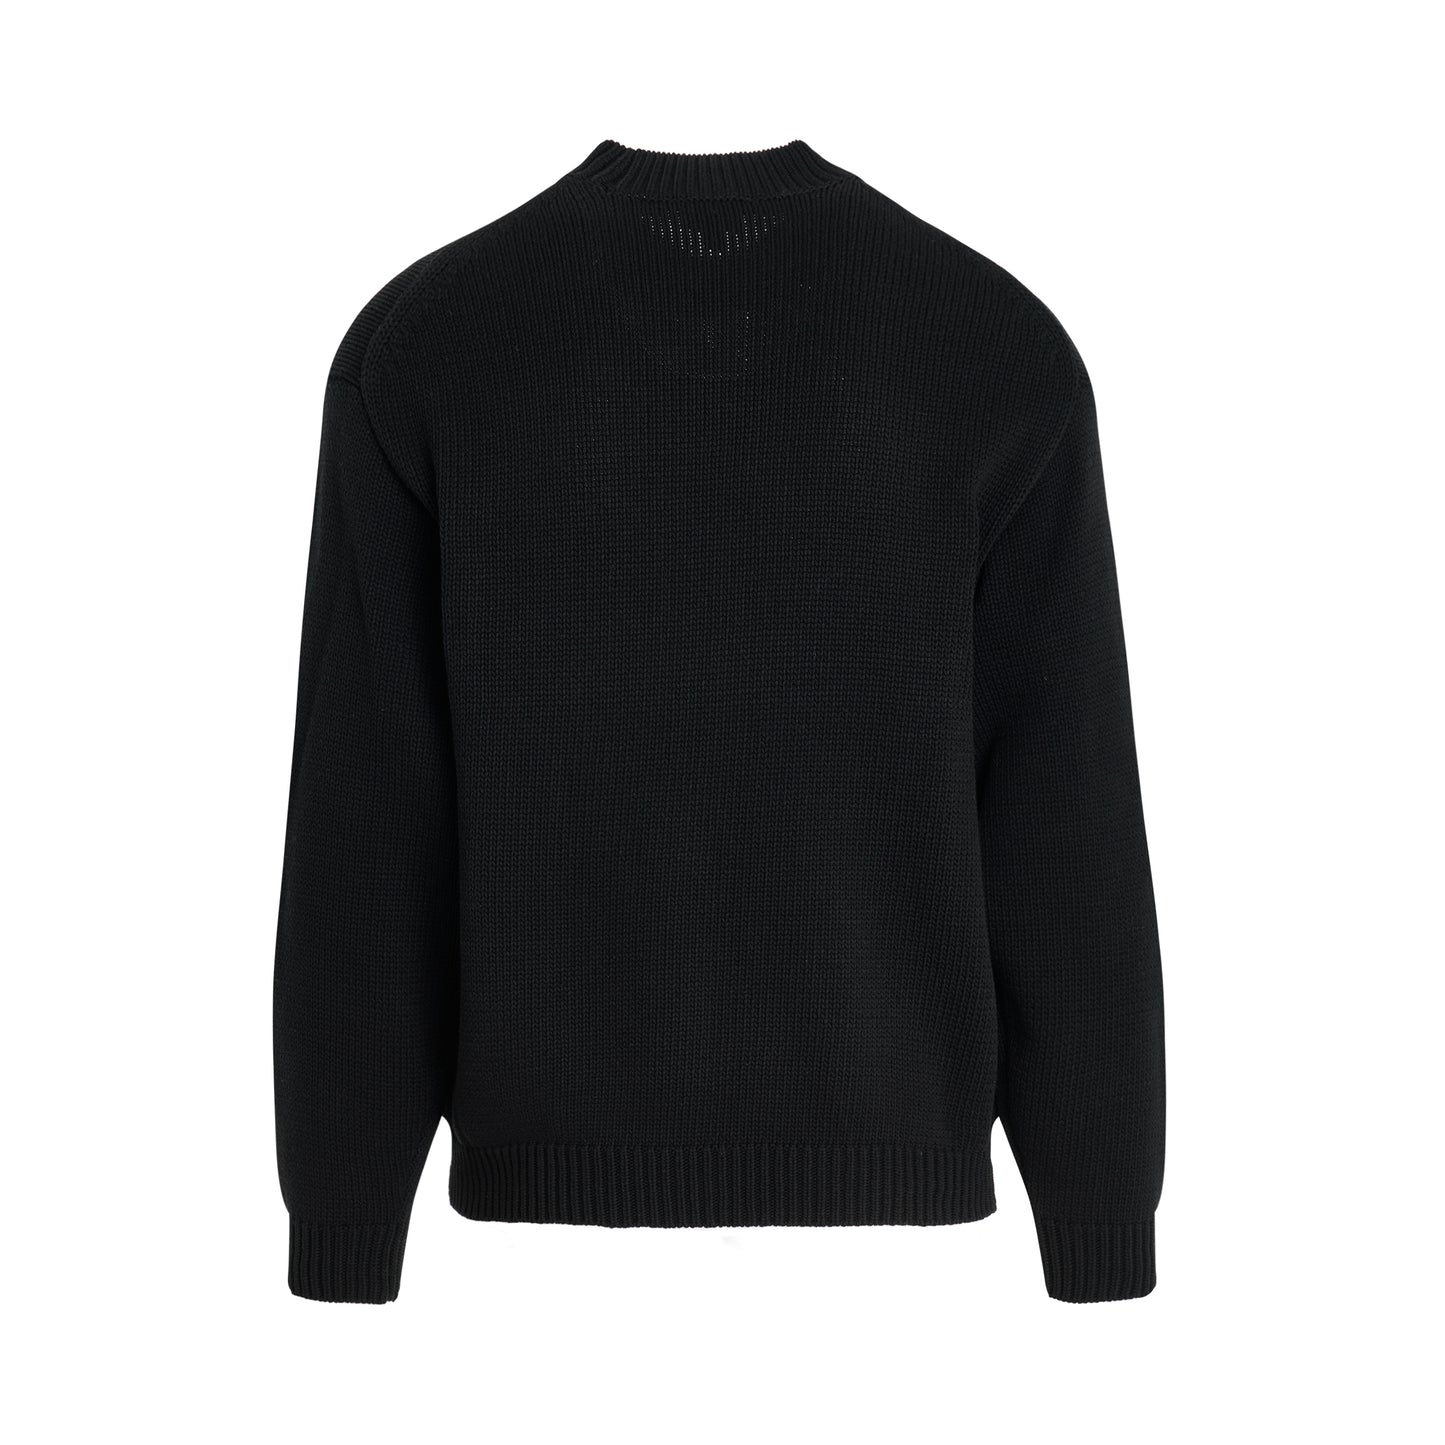 Kenzo Lucky Tiger Knit Sweater in Black